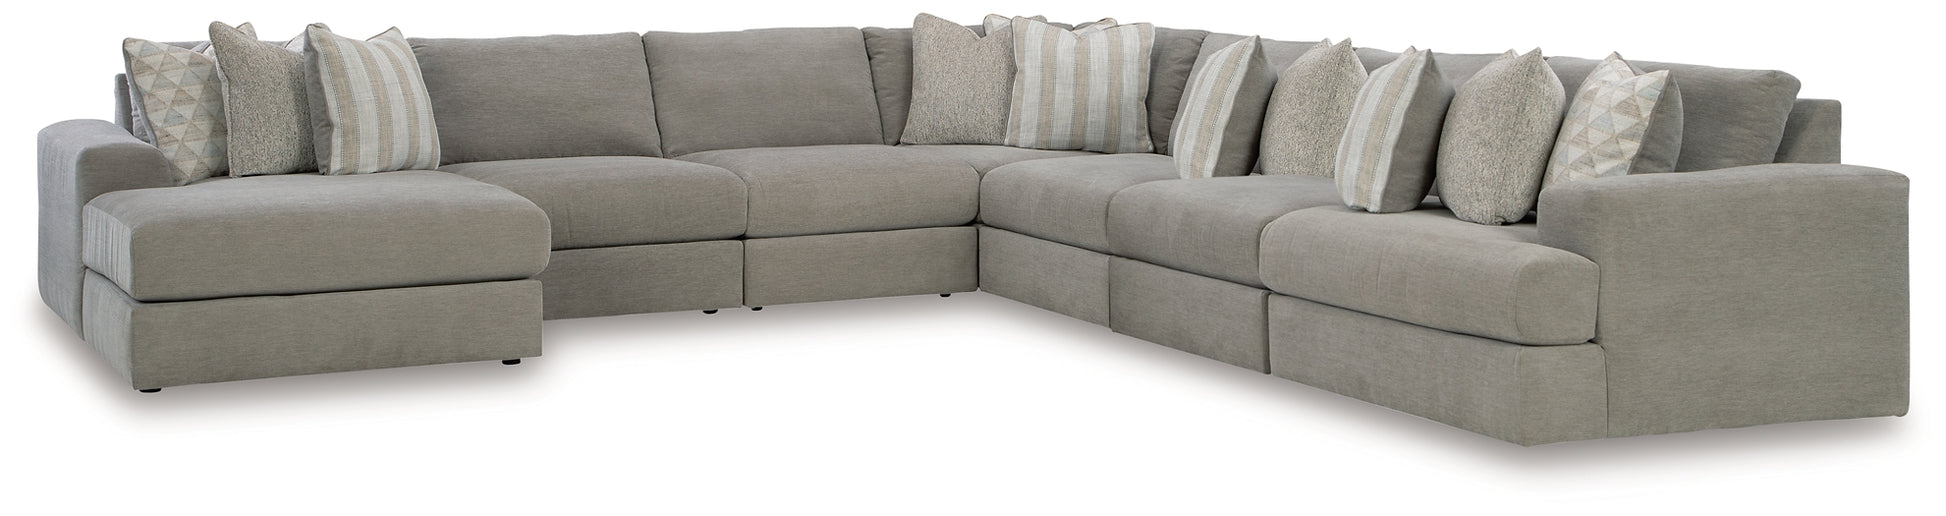 Avaliyah 7-Piece Sectional with Ottoman Signature Design by Ashley®